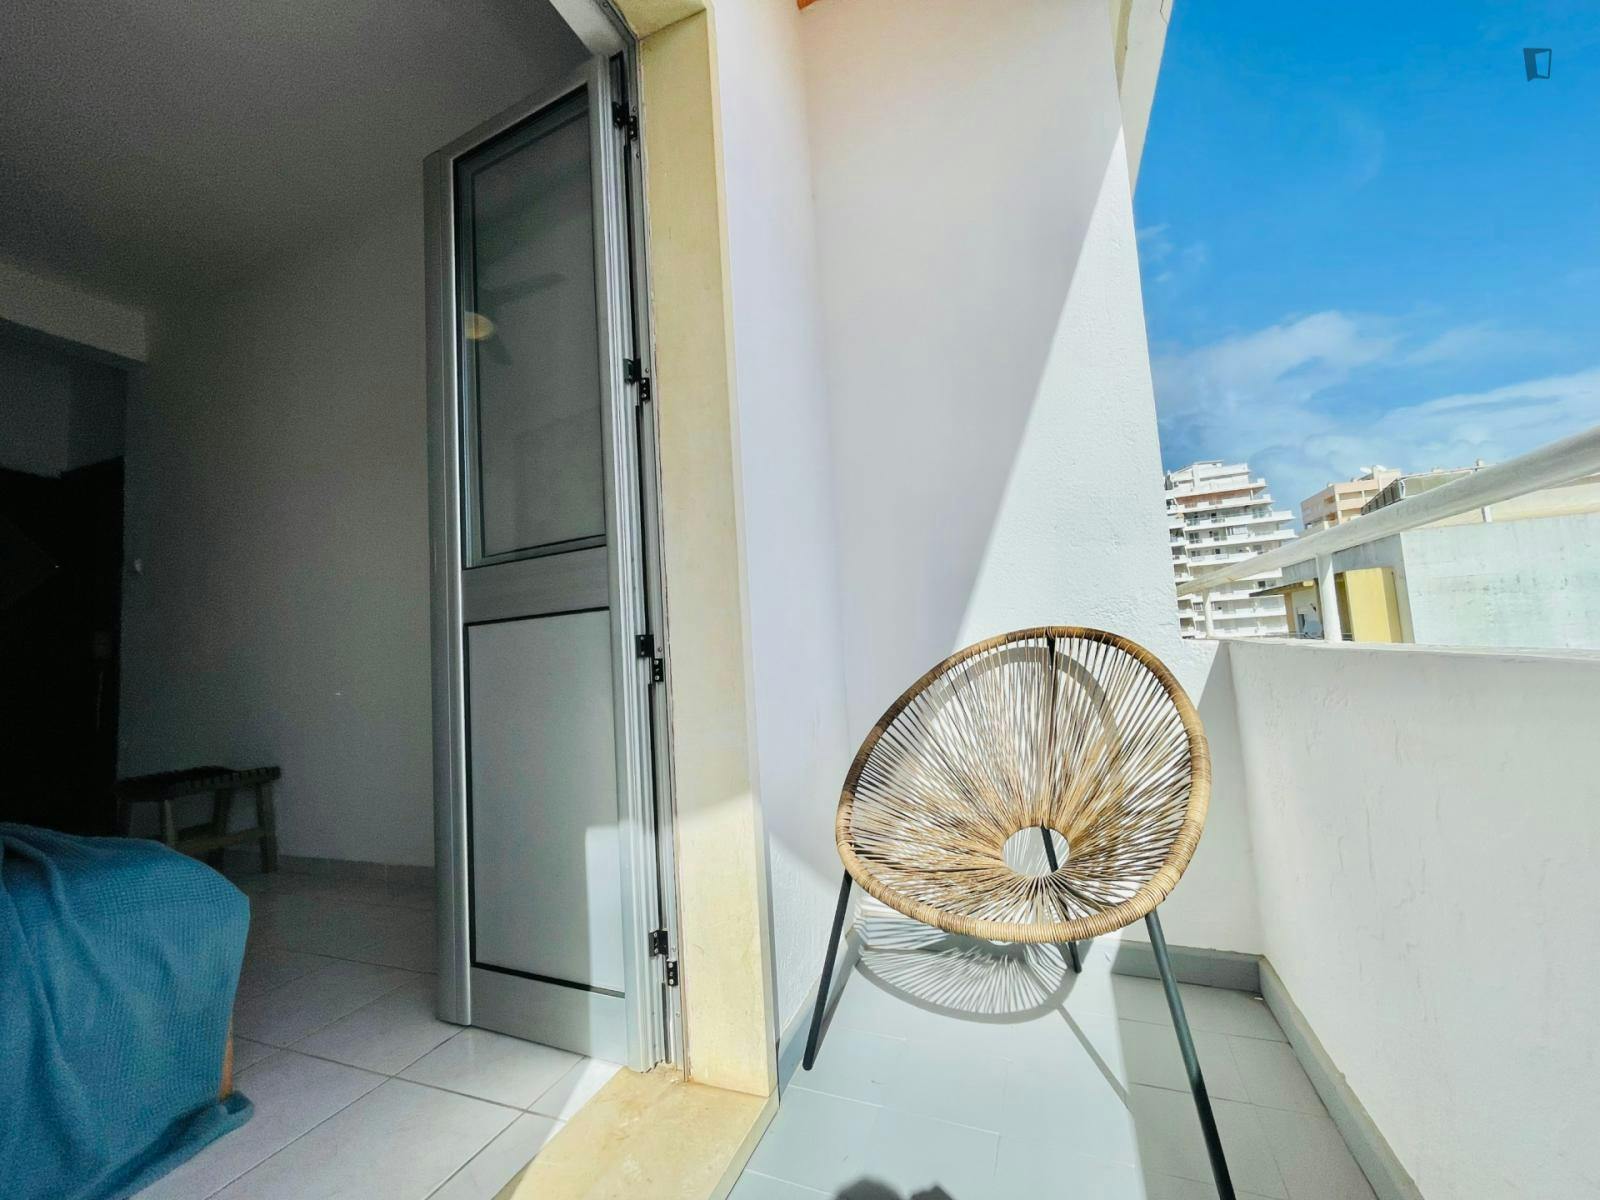 2-bedroom apartment, with outdoor area